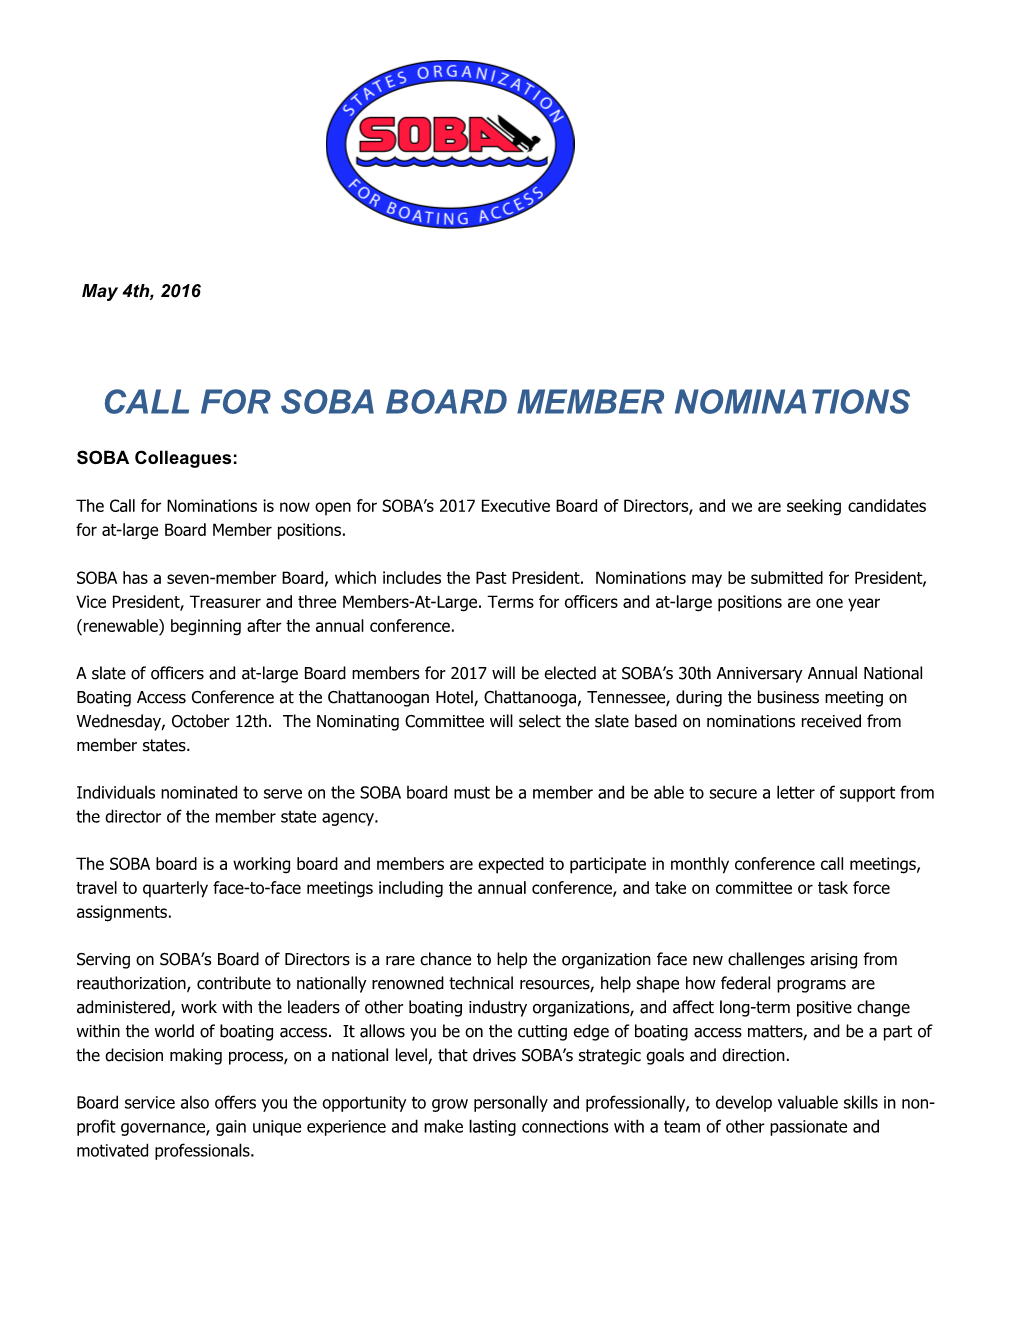 Call for Soba Board Member Nominations